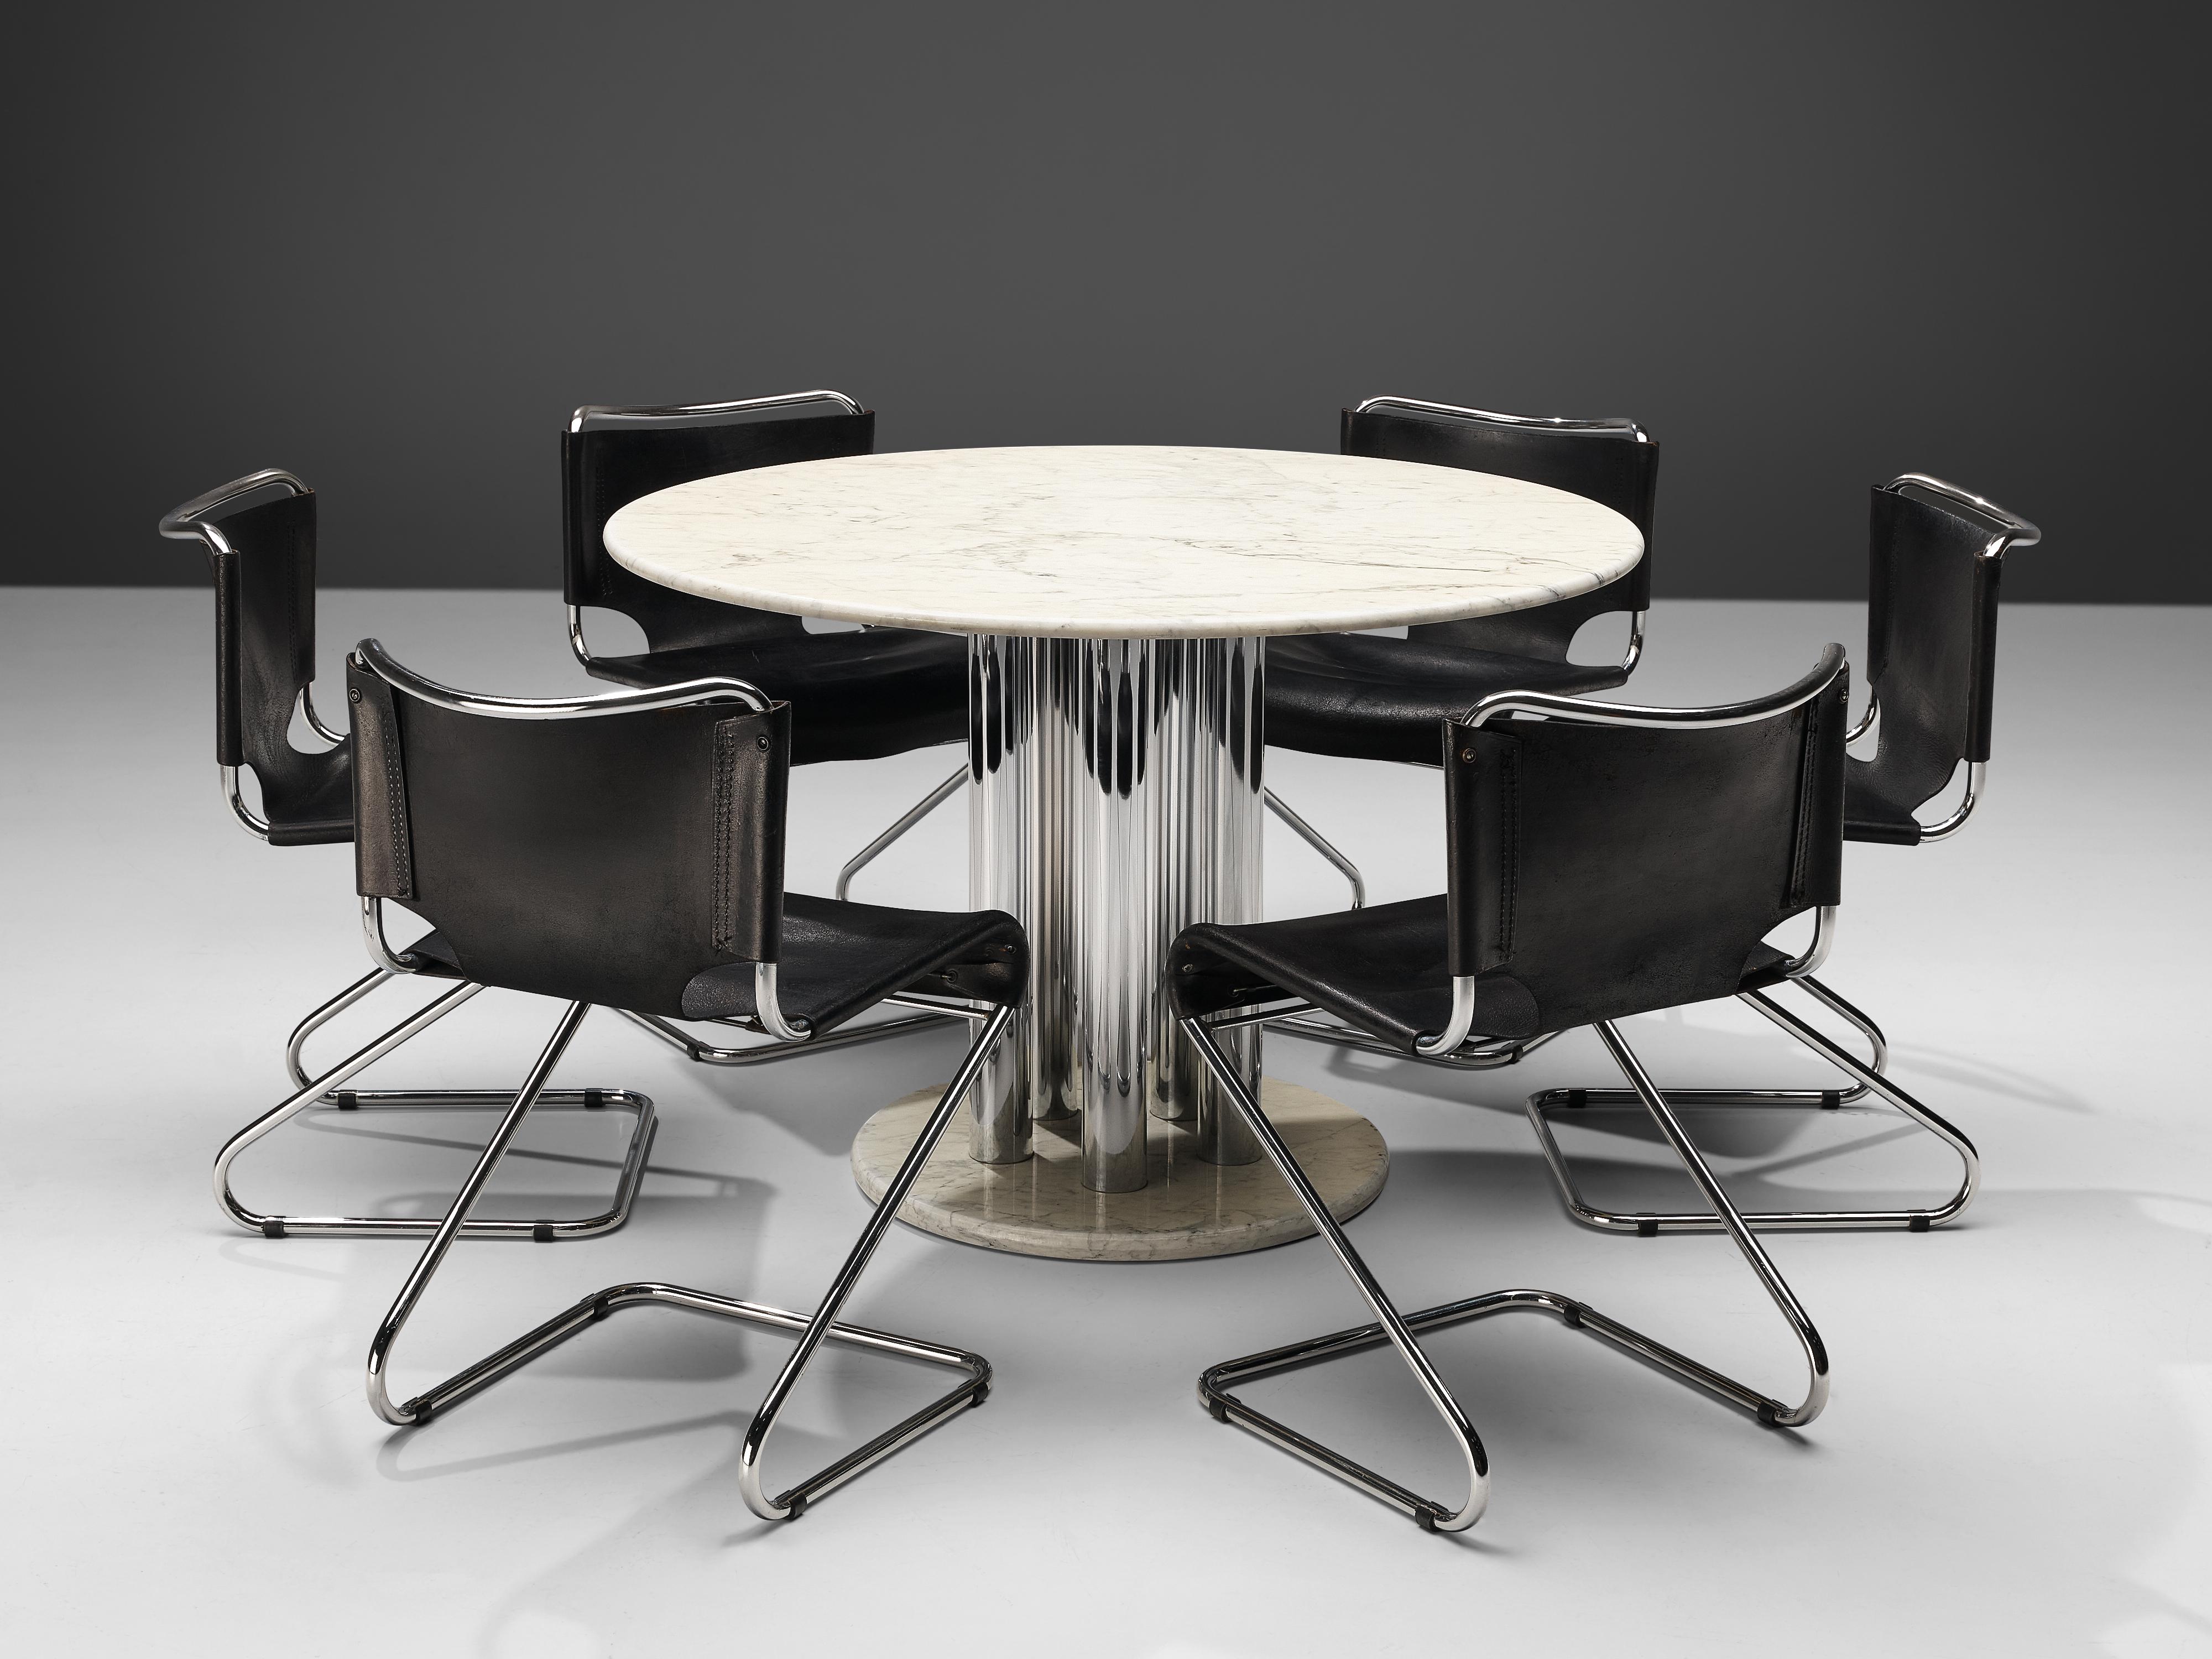 Italian dining table, marble, metal, Italy, 1980s
This wonderful example of Italian postmodern design shows an exciting combination of materials, textures and shapes. A round tabletop in white marble is echoed by a round foot in smaller size.